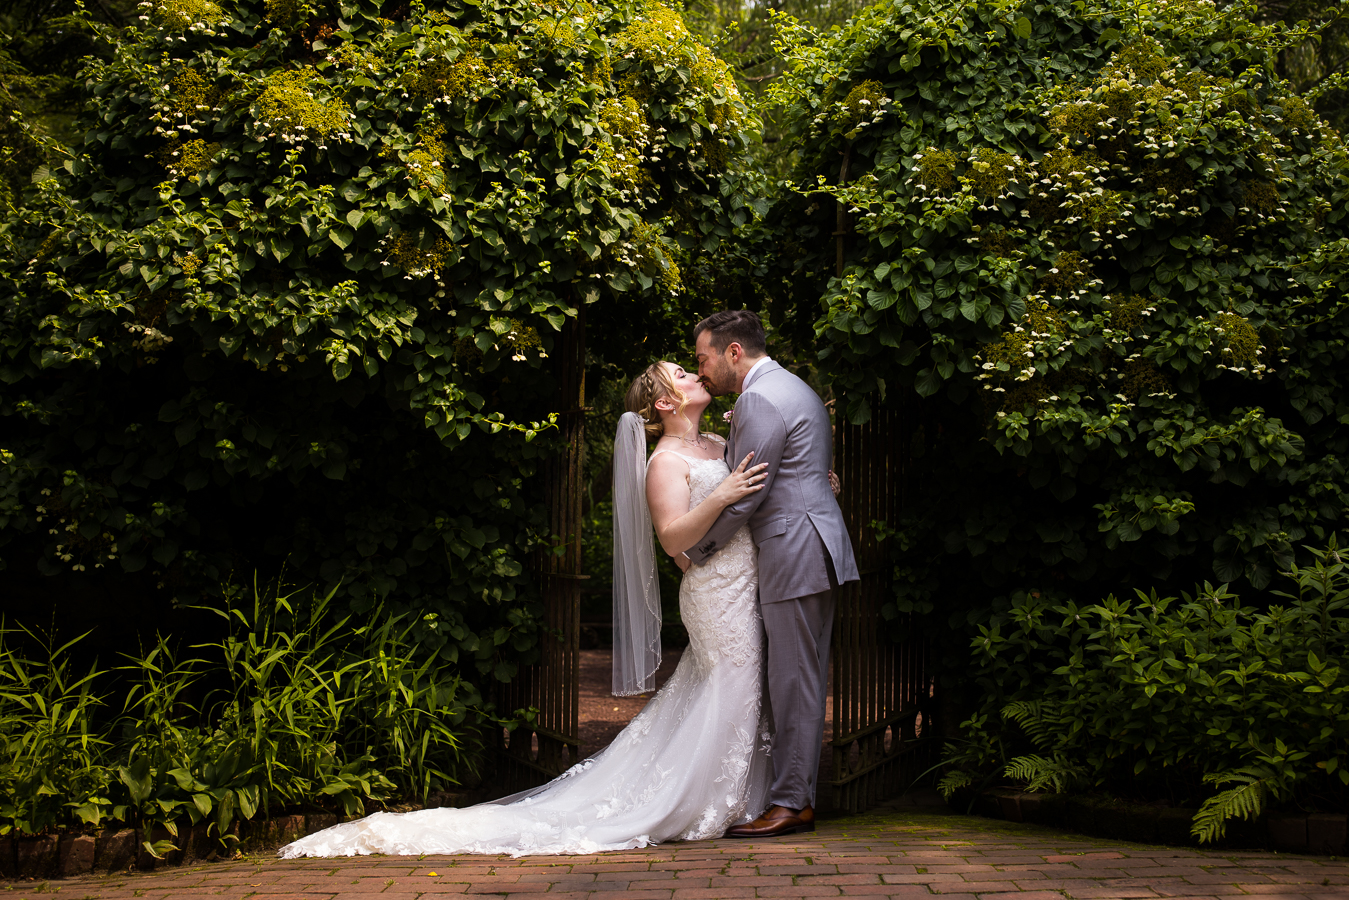 traditional image of the bride and groom hugging one another and kissing as they stand in front of the gate and are surrounded by lush greenery 